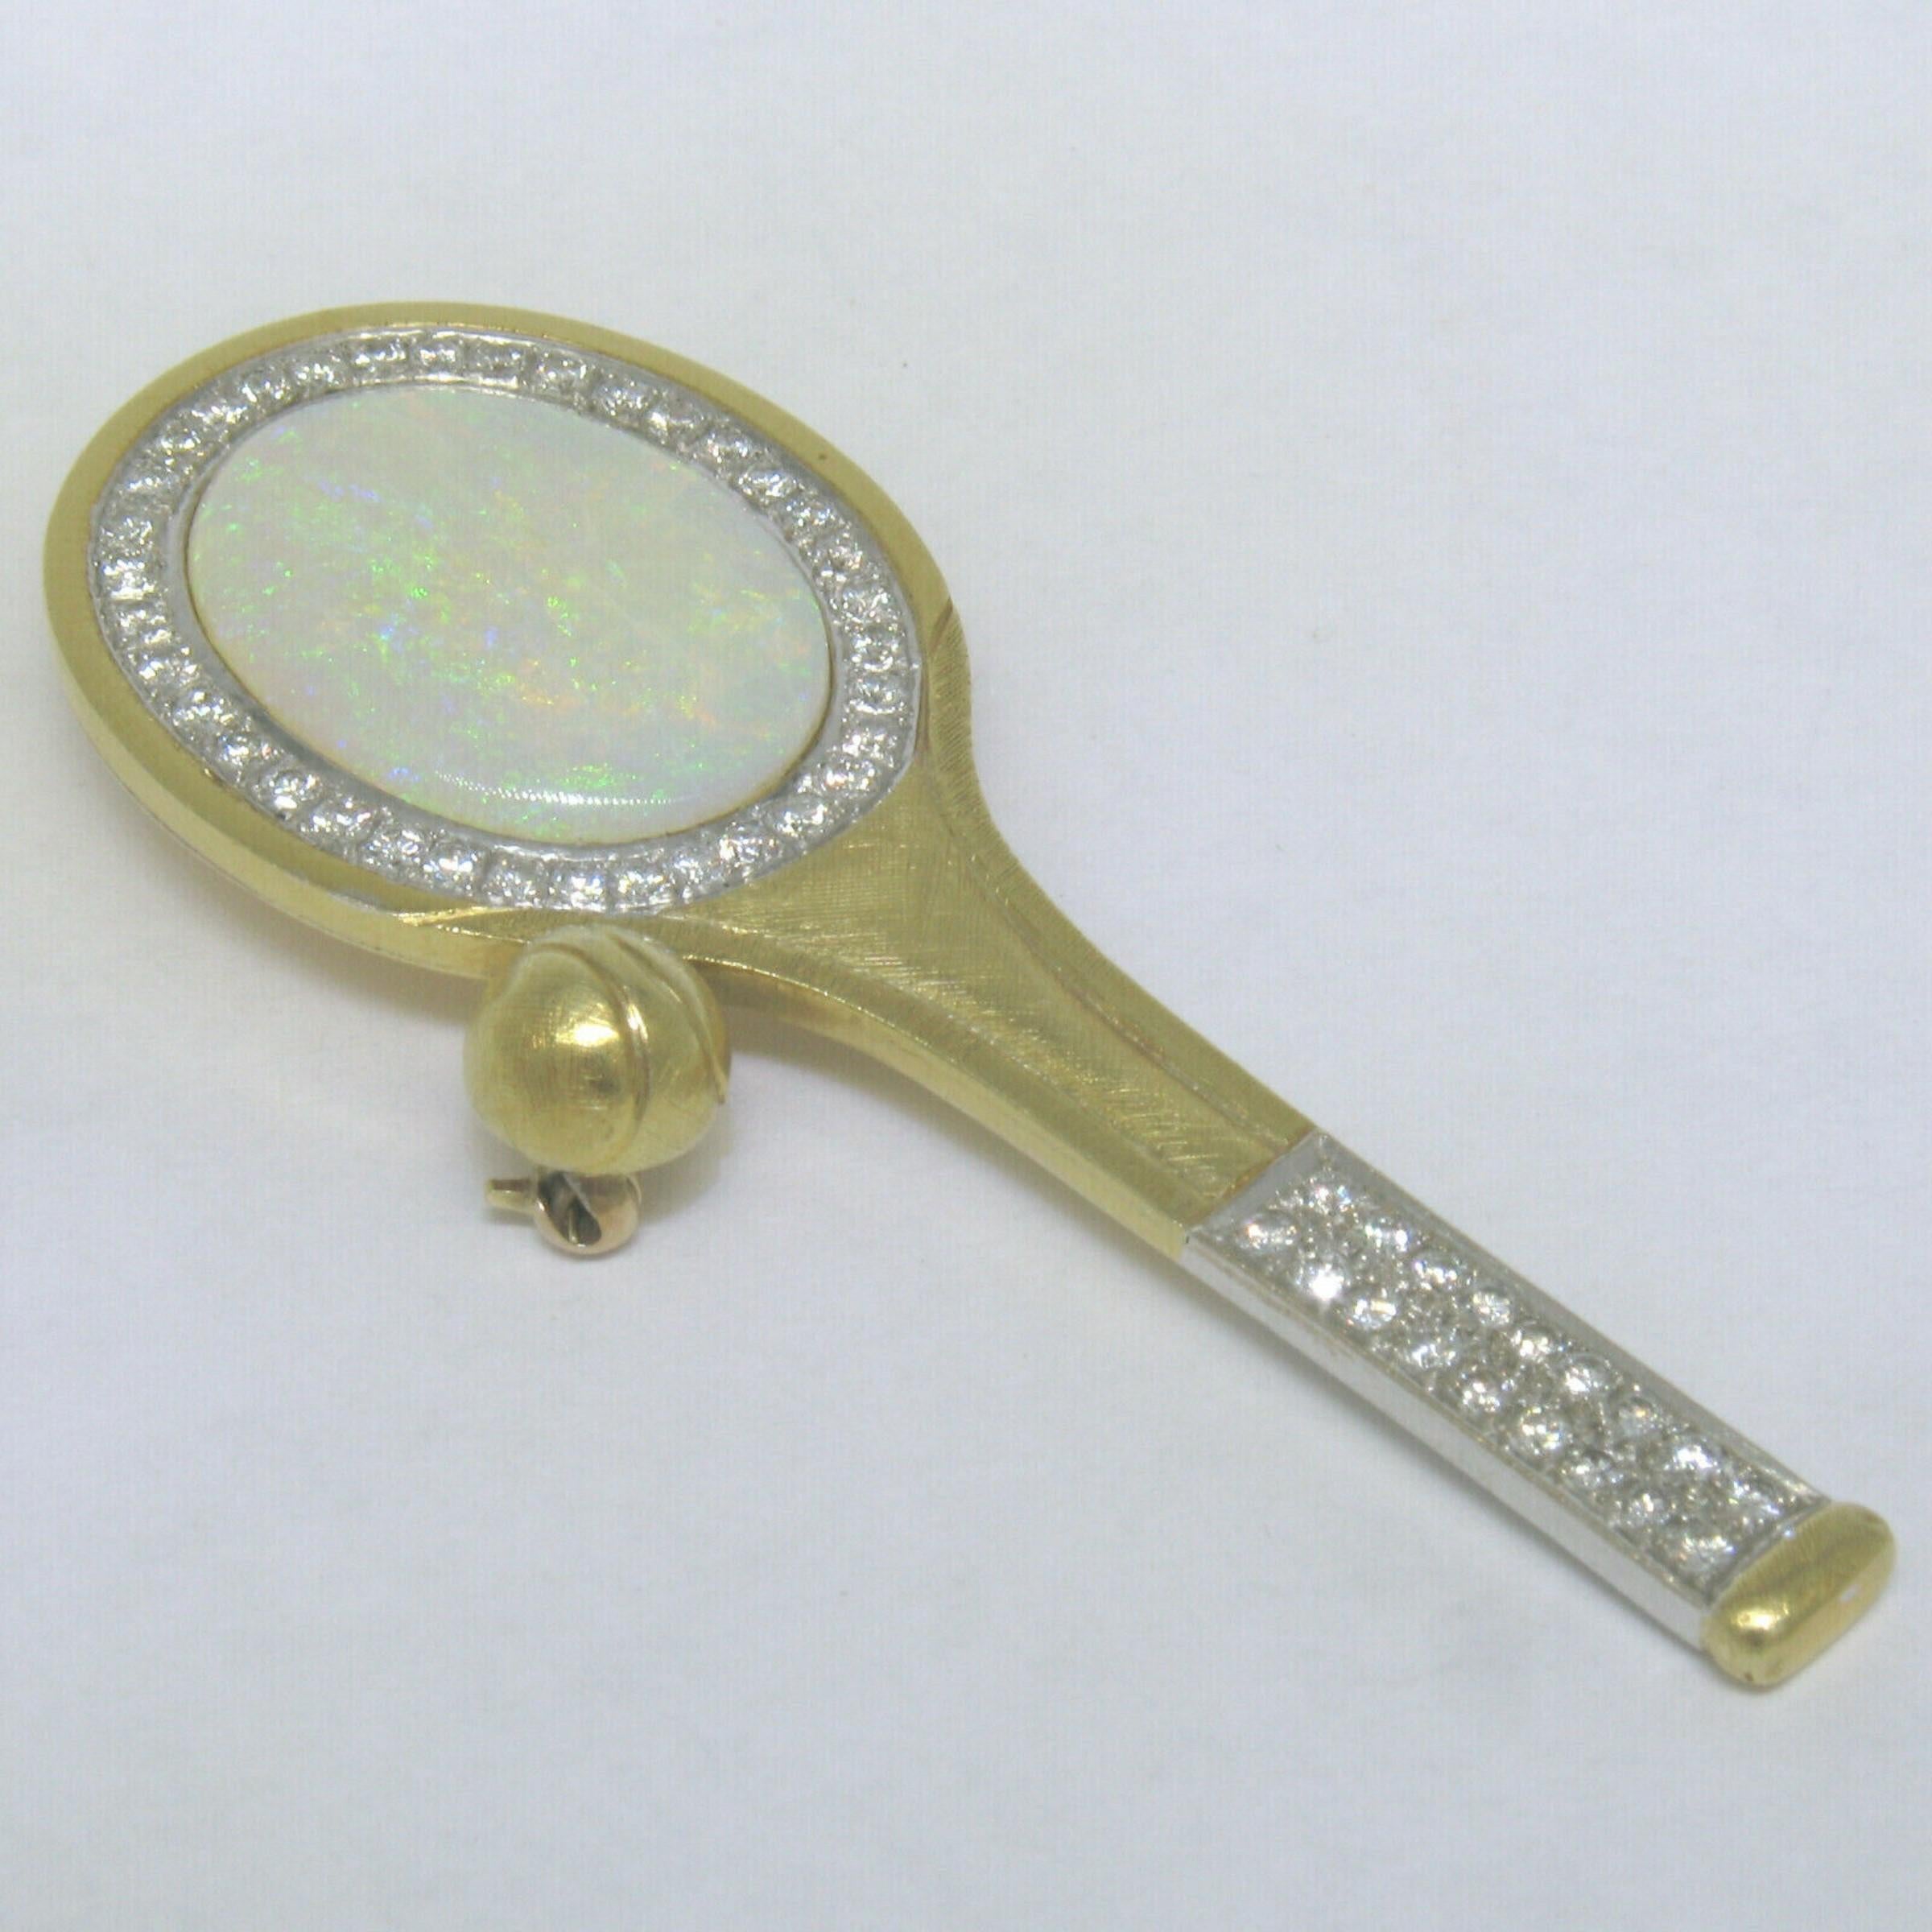 Vintage 18k Gold 11.60ctw Large Opal & Diamond Tennis Racket Brooch Pin Pendant In Good Condition For Sale In Montclair, NJ